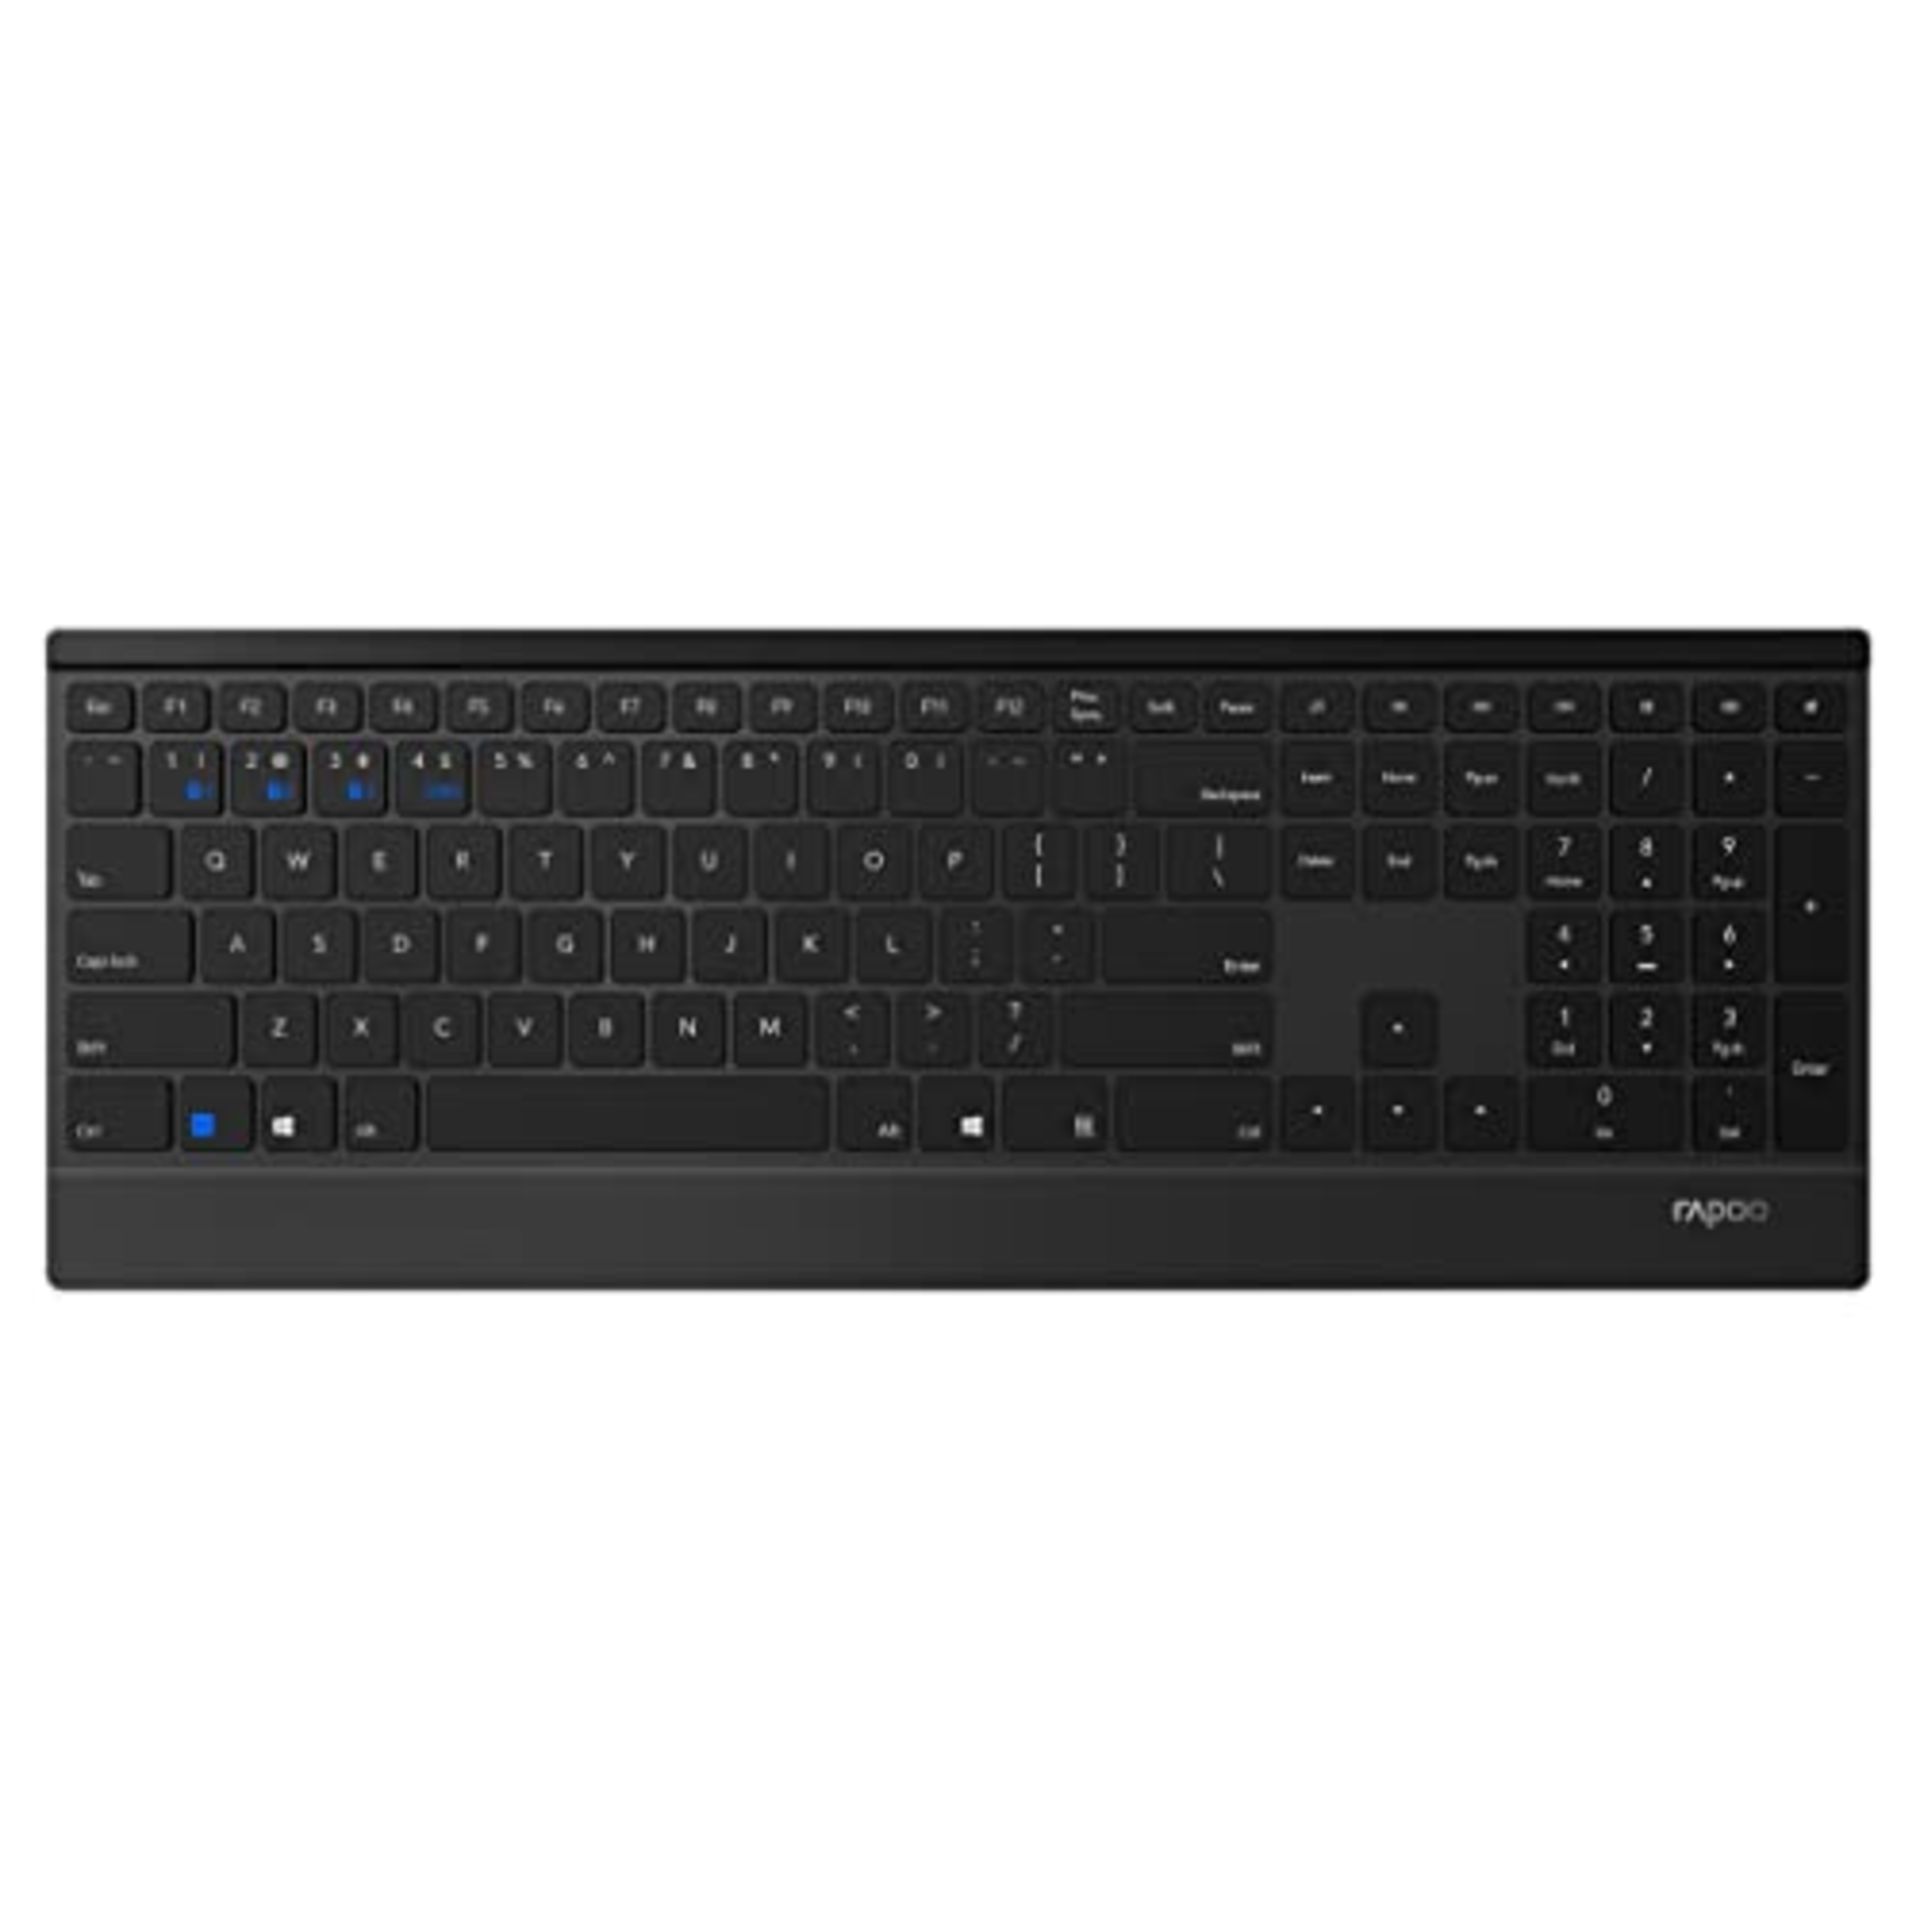 Rapoo E9500M wireless keyboard, Bluetooth and wireless (2.4 GHz) via USB, connect mult